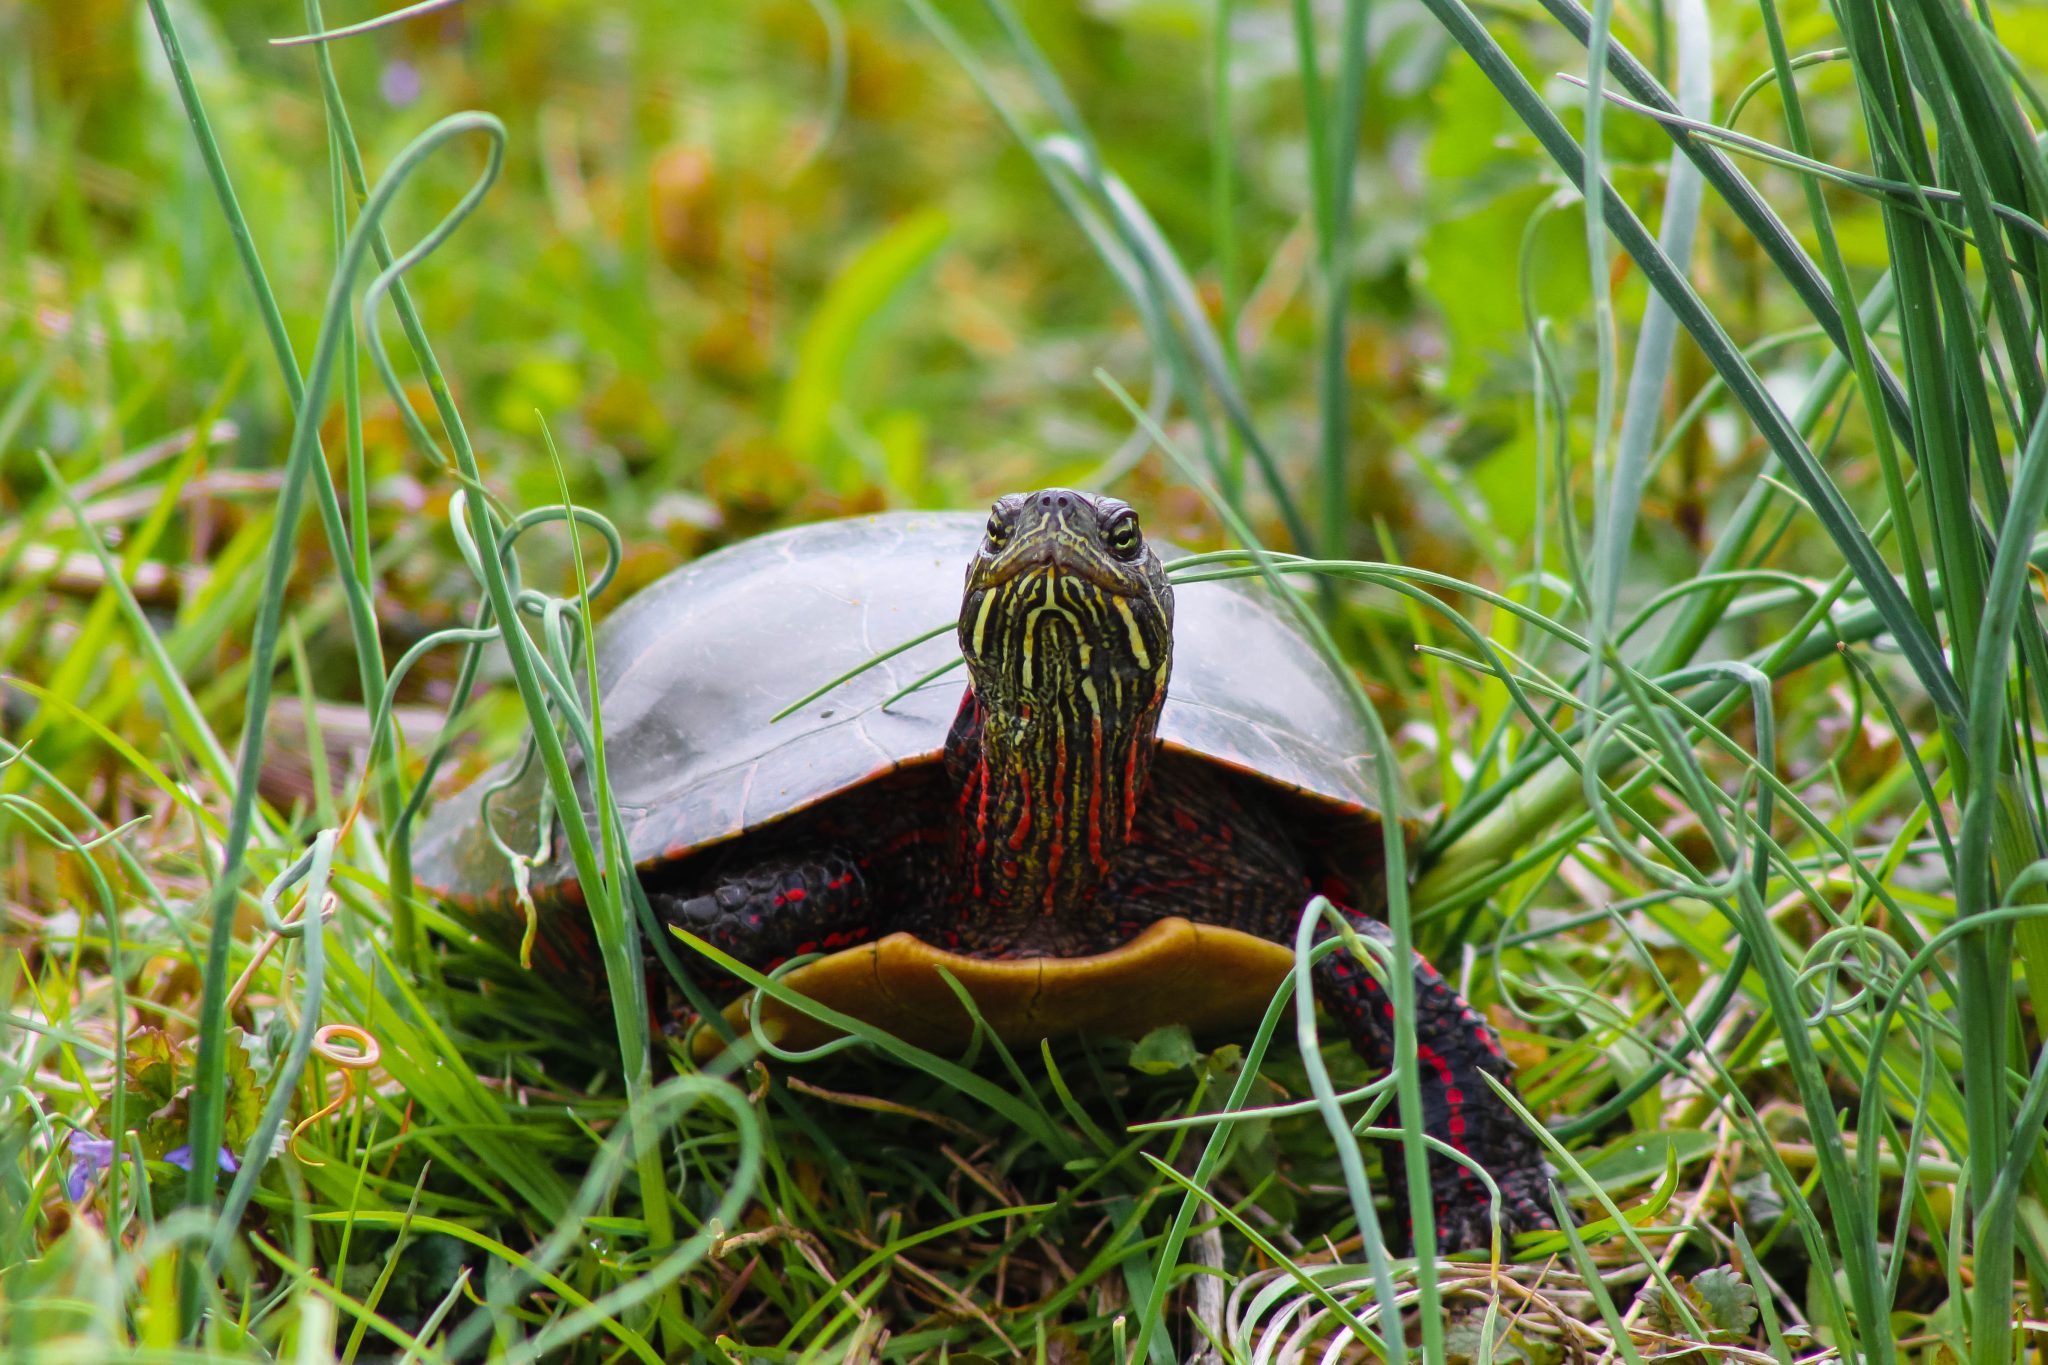 Painted turtle surrounded by grass